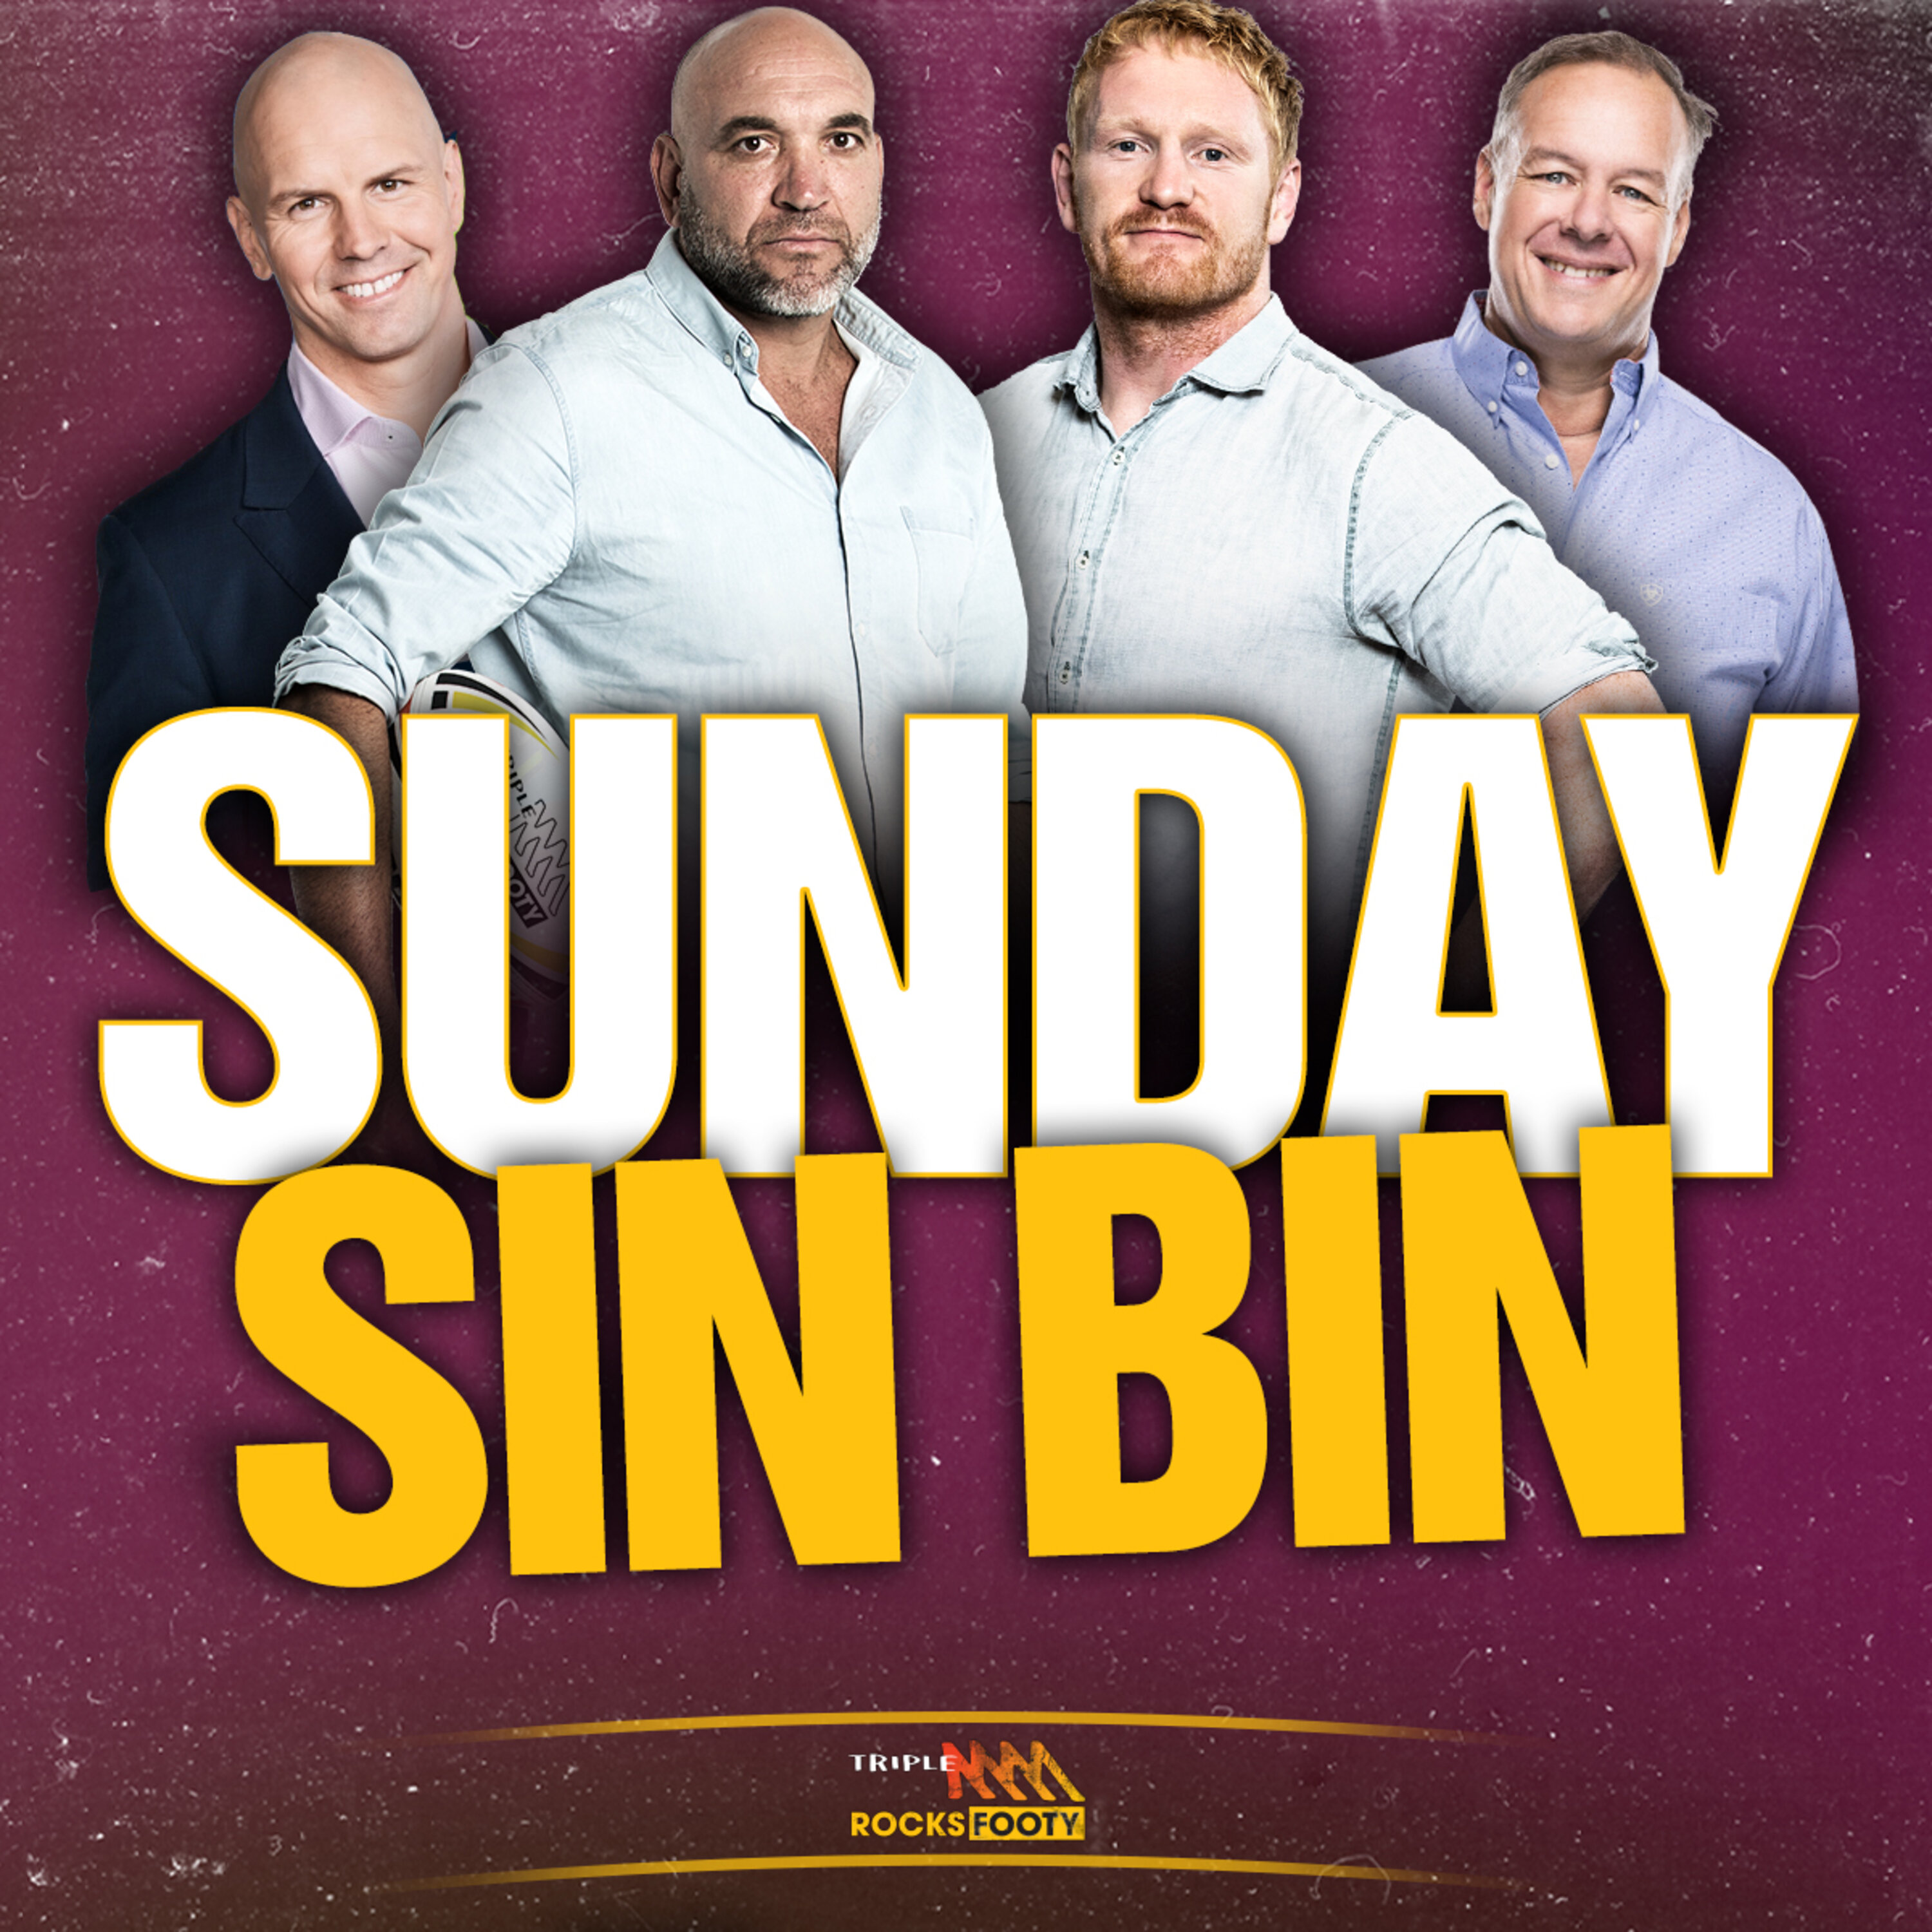 Sunday Sin Bin | Is It Time For Brad Arthur To Go? The Bunker Blunders Continue & Are The Roosters Still Contenders?